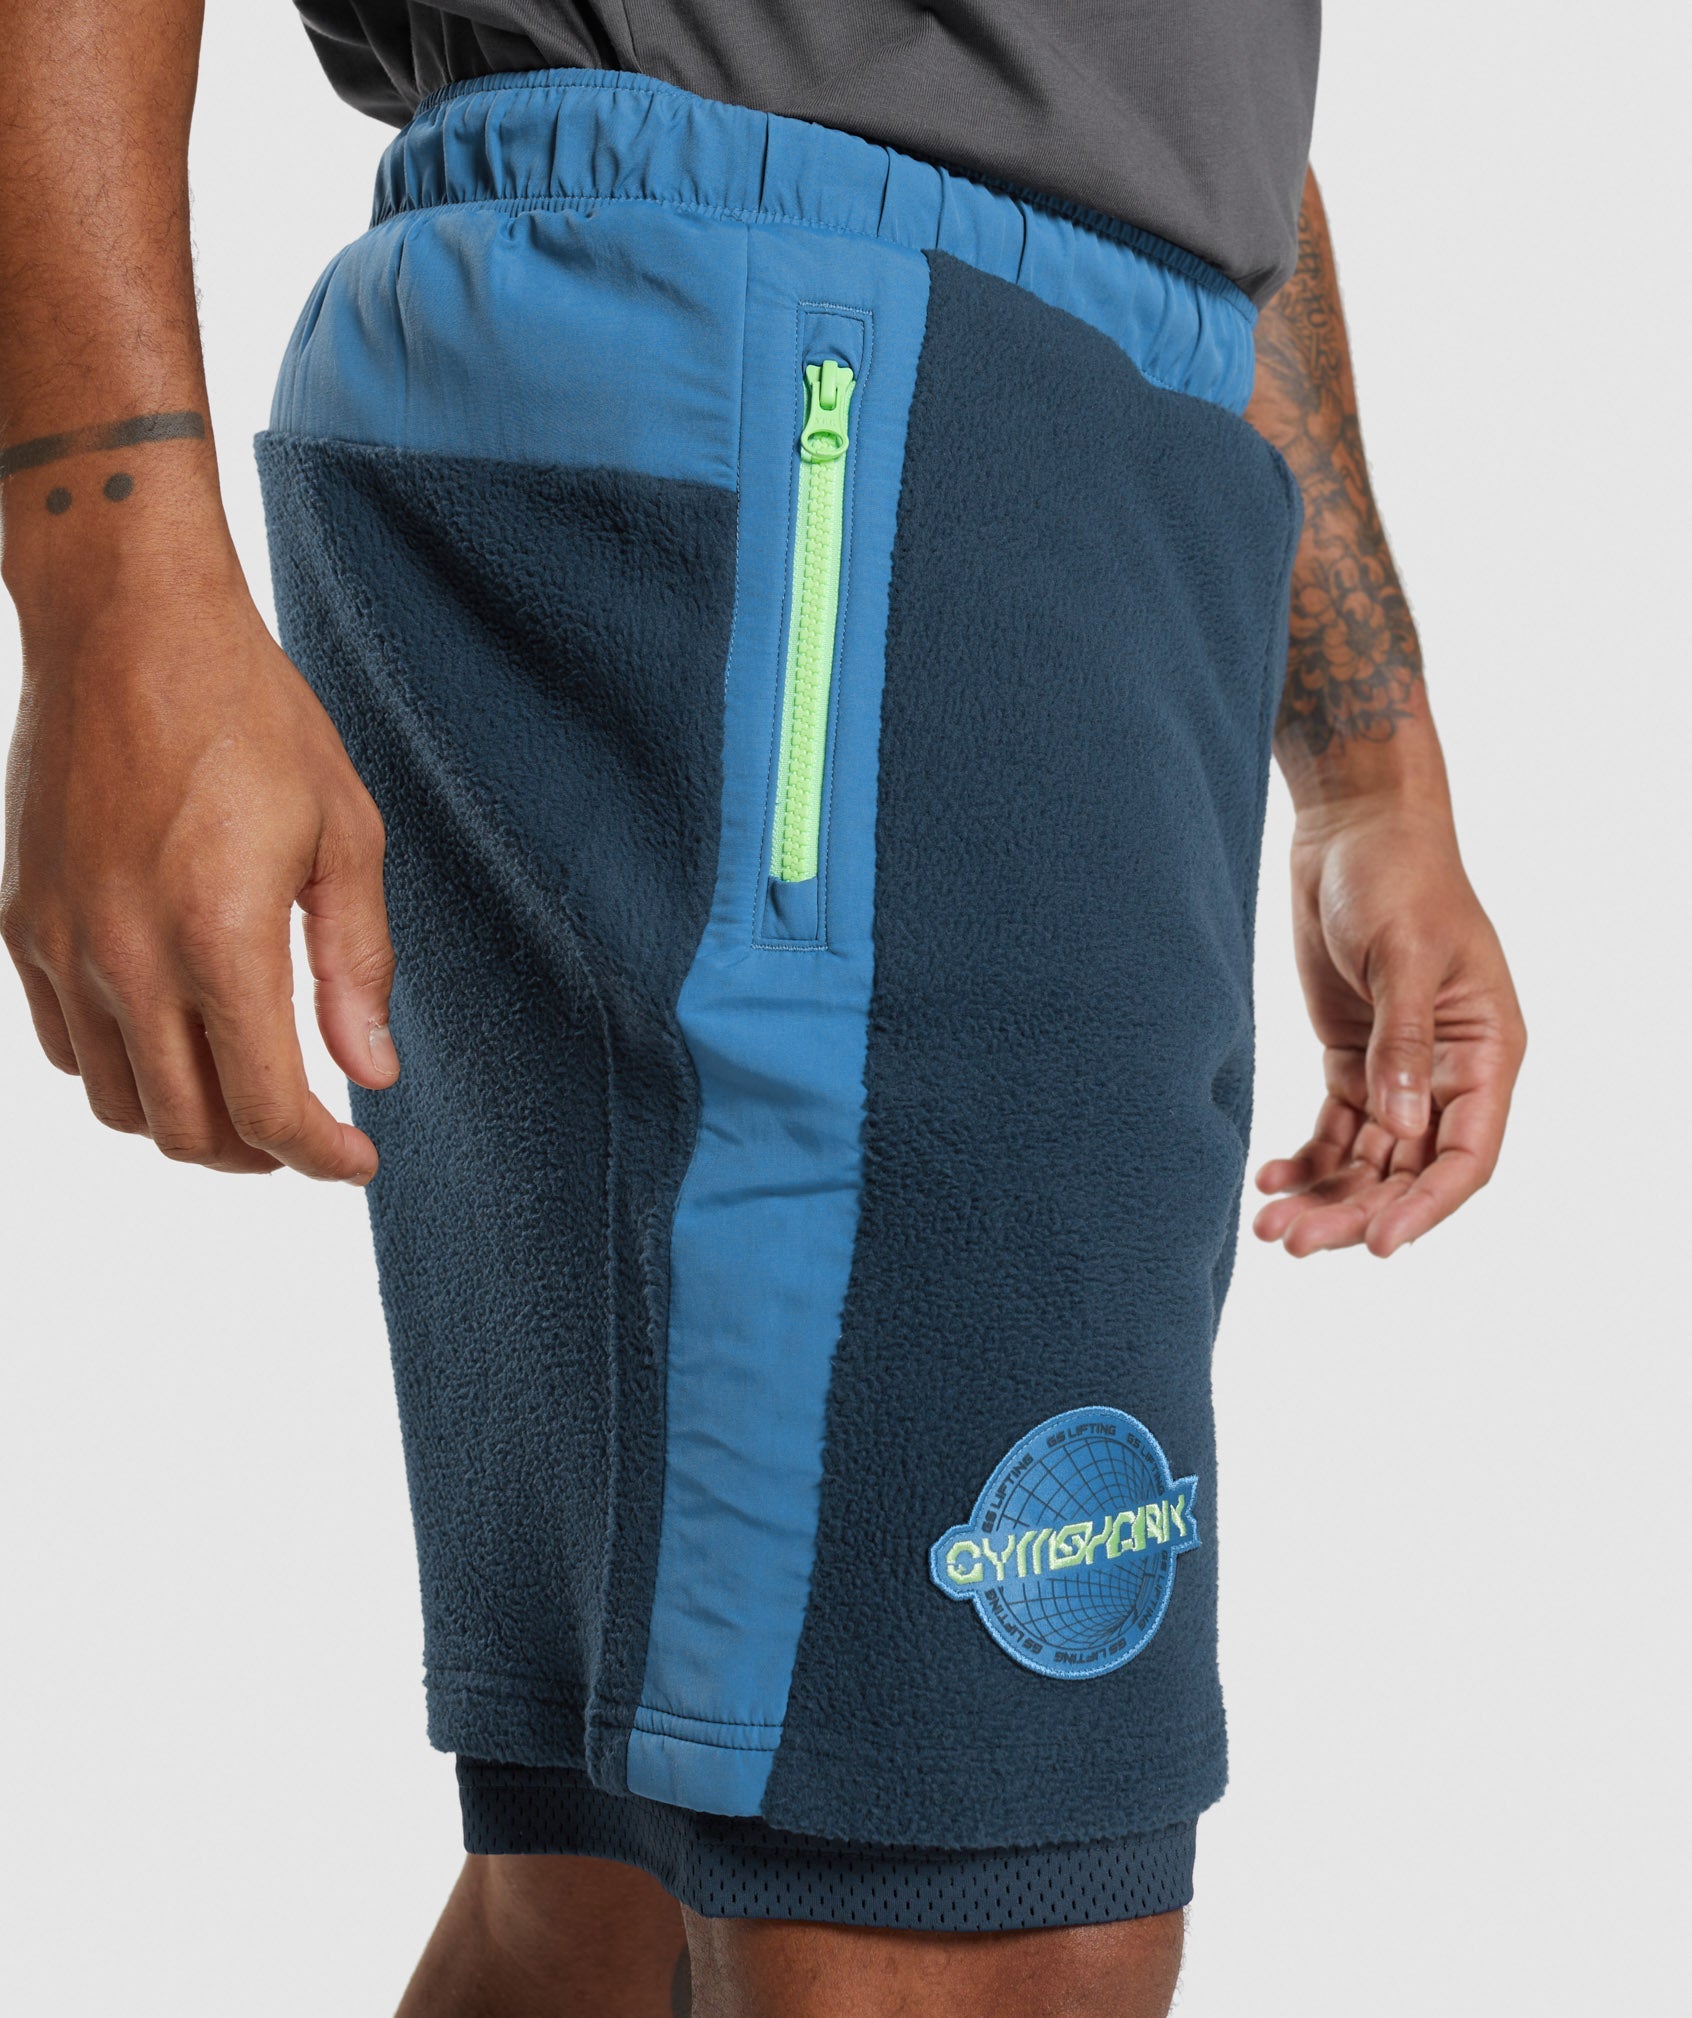 Vibes Shorts in Navy/Lakeside Blue - view 5